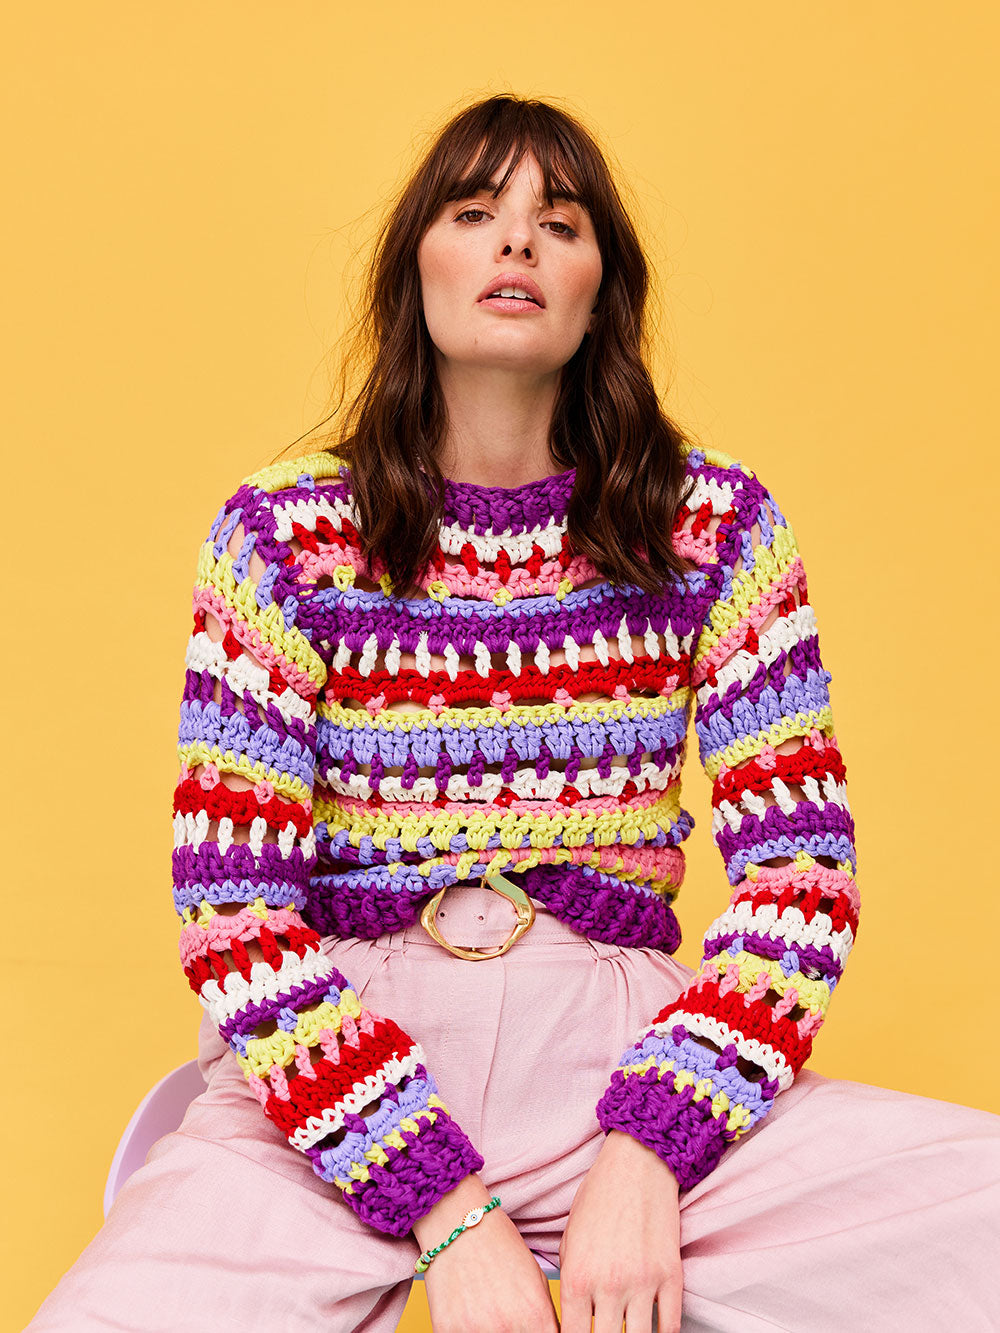 Woman with dark wavy hair is sitting on a lilac stool wearing a DIY striped crochet jumper by Cardigang